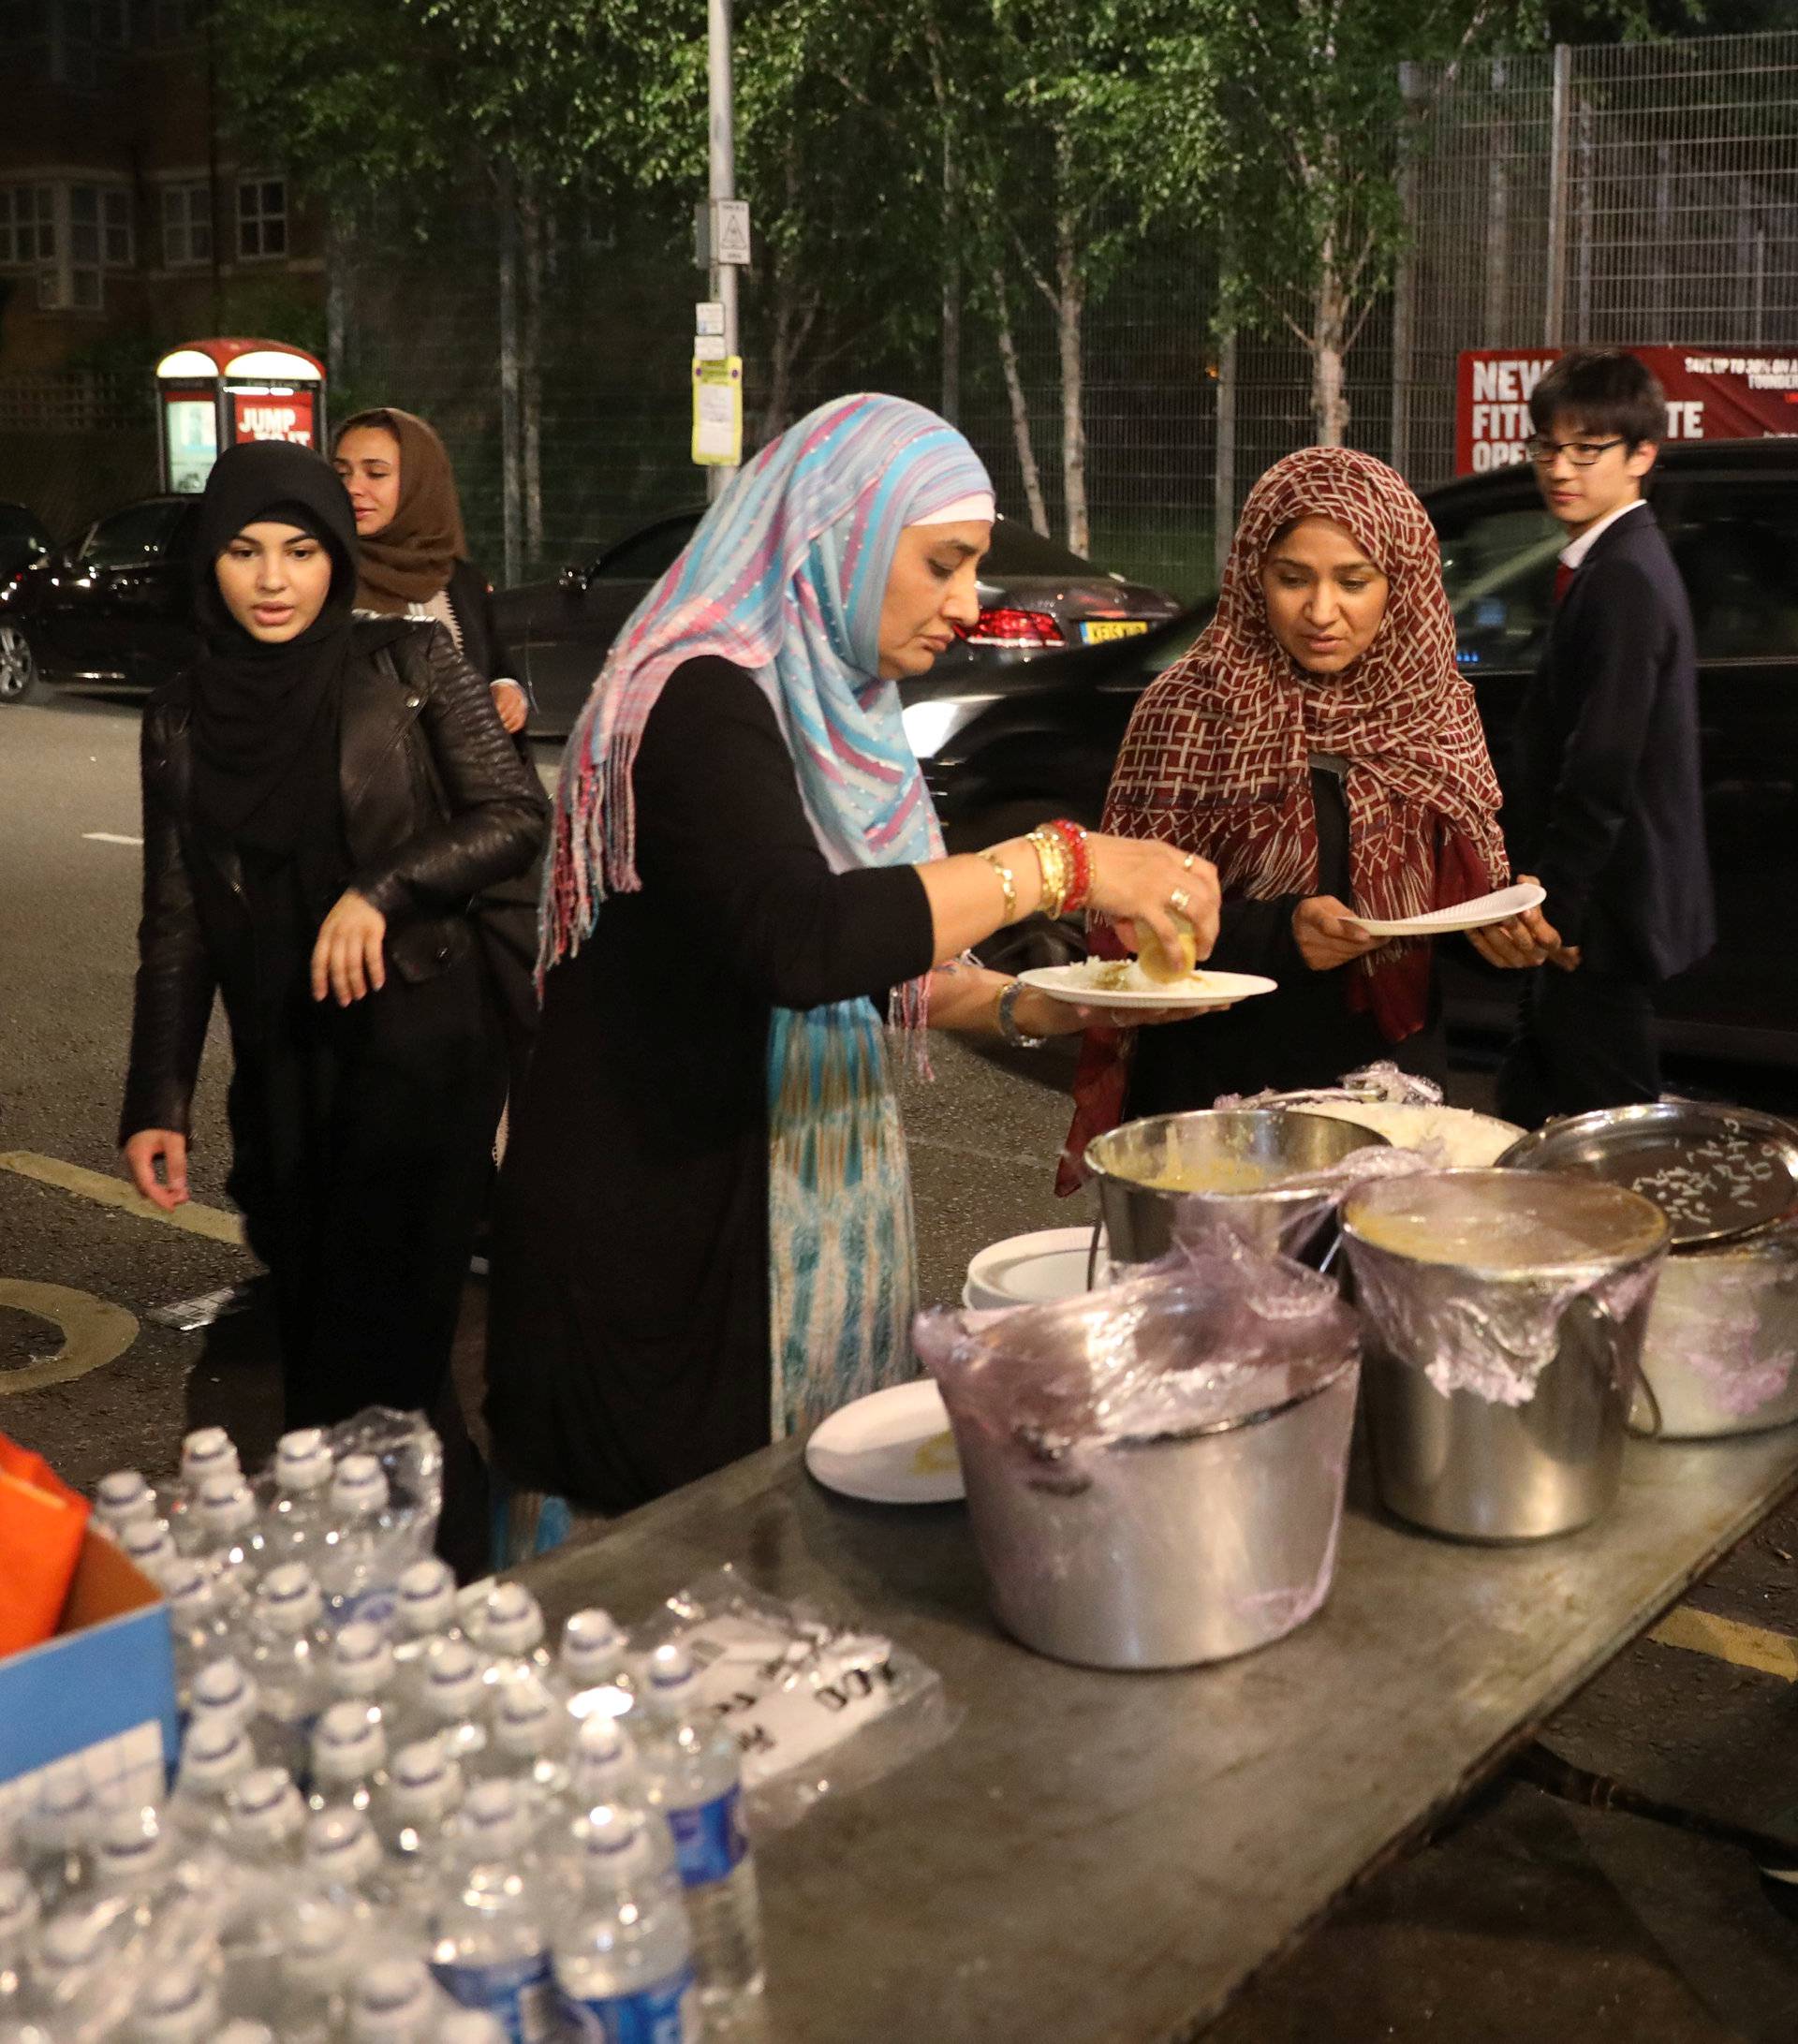 Food is distributed near a tower block severely damaged by a serious fire, in north Kensington, West London